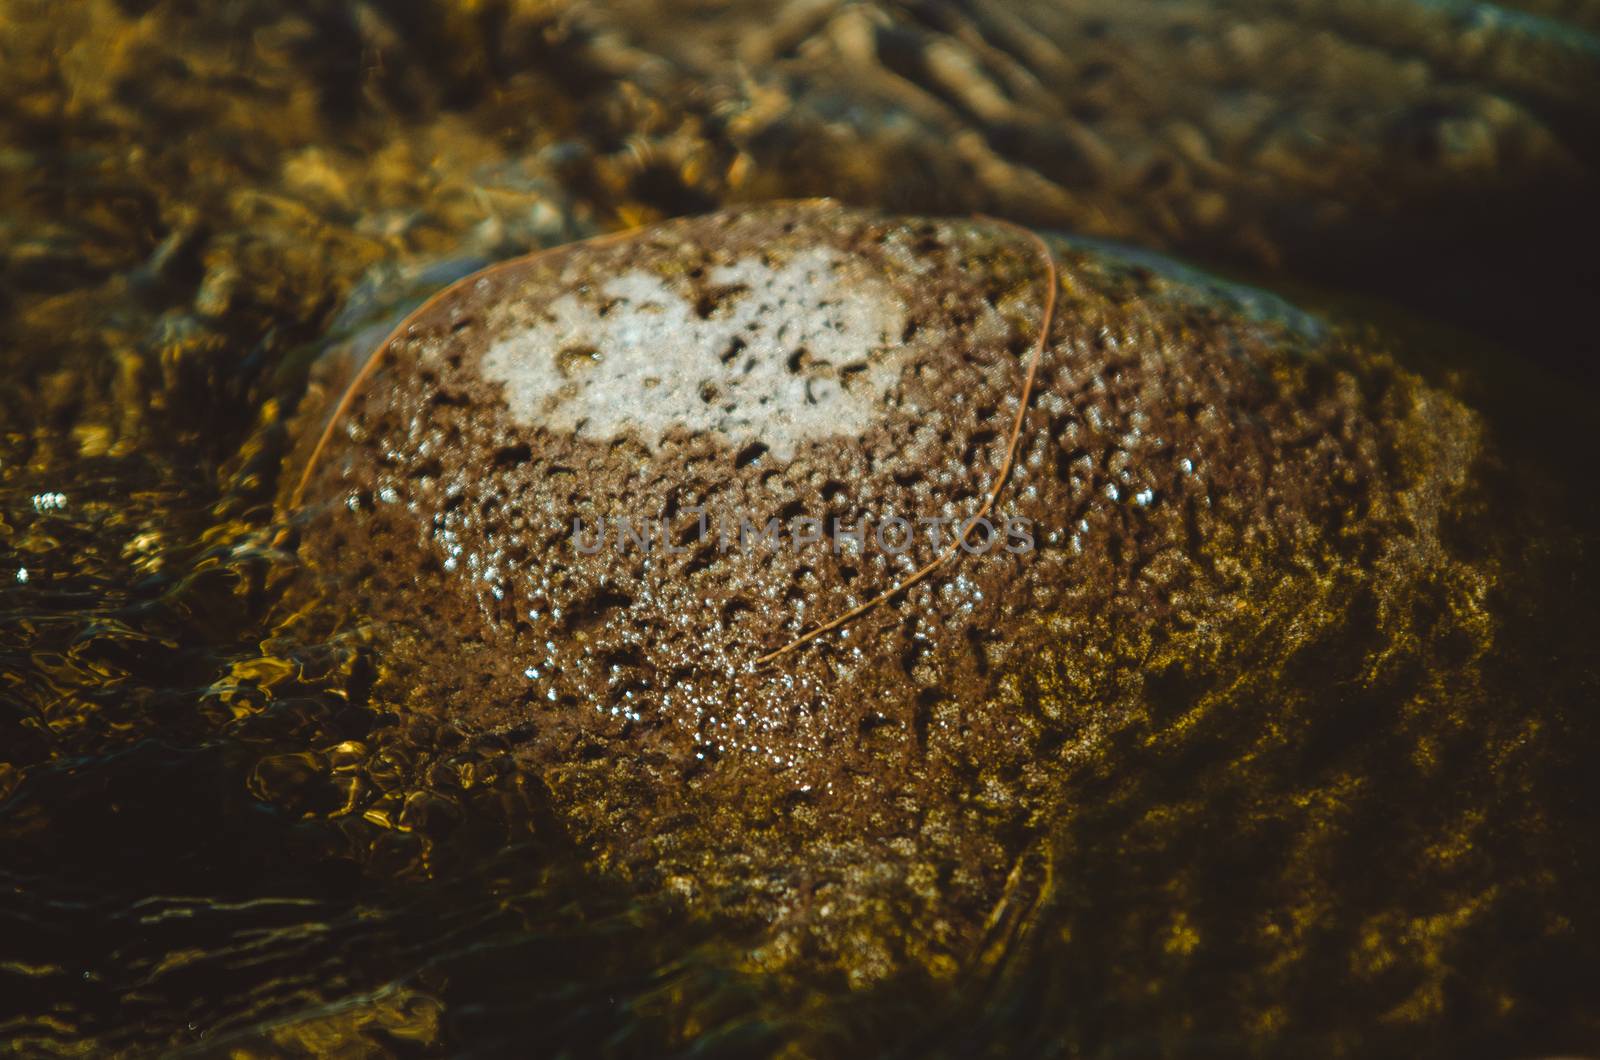 Green and brown image of a single rock in the river bed, covered by moss and mud